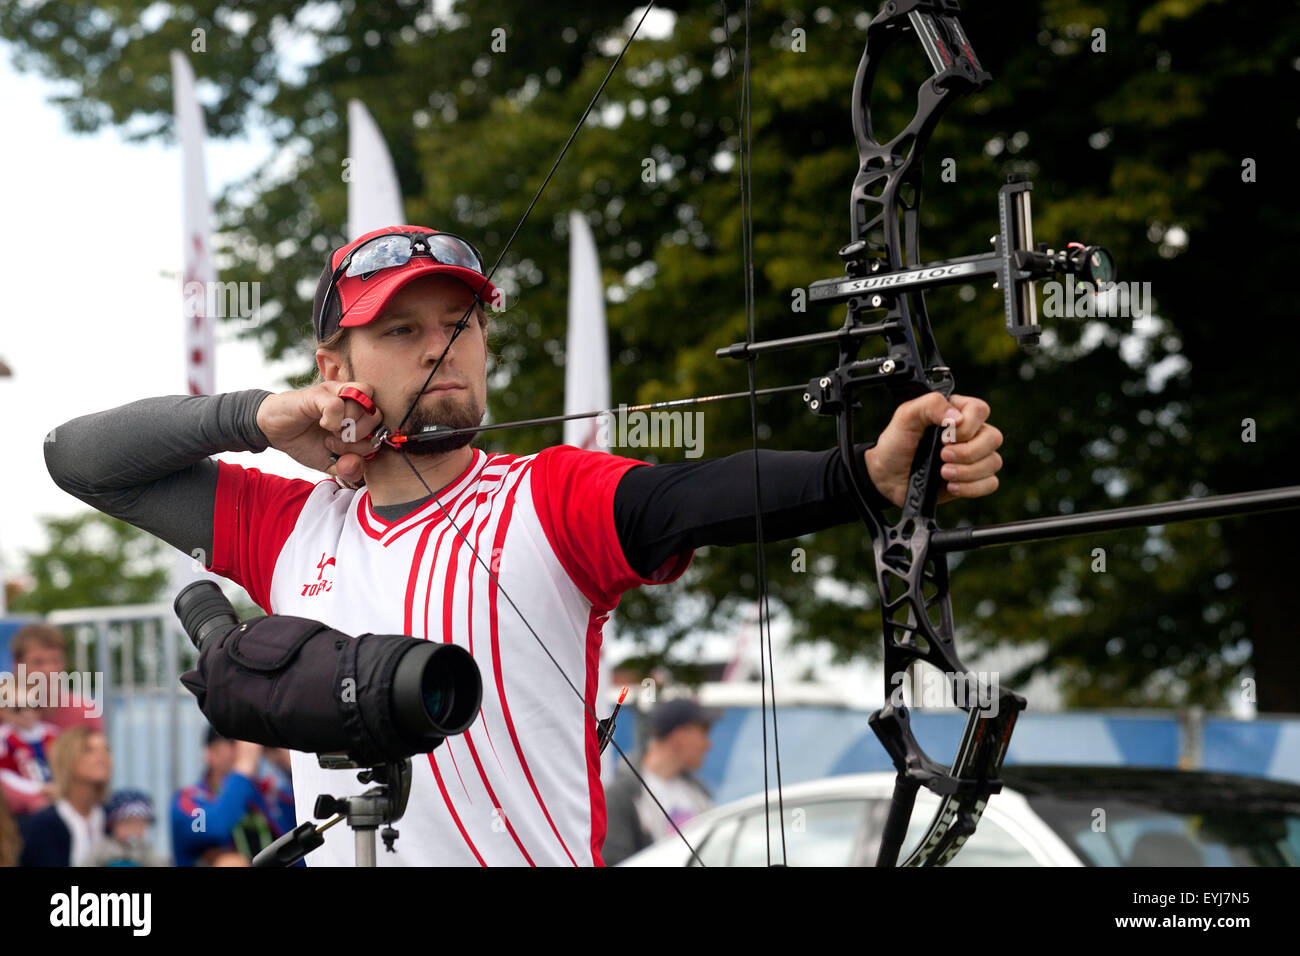 Copenhagen, Denmark, July 30th, 2015: Swiss archer Roman Haefelfinger competes in the World Archery Championships in Copenhagen during Thursday's individual matches  in compound bow. Credit:  OJPHOTOS/Alamy Live News Stock Photo